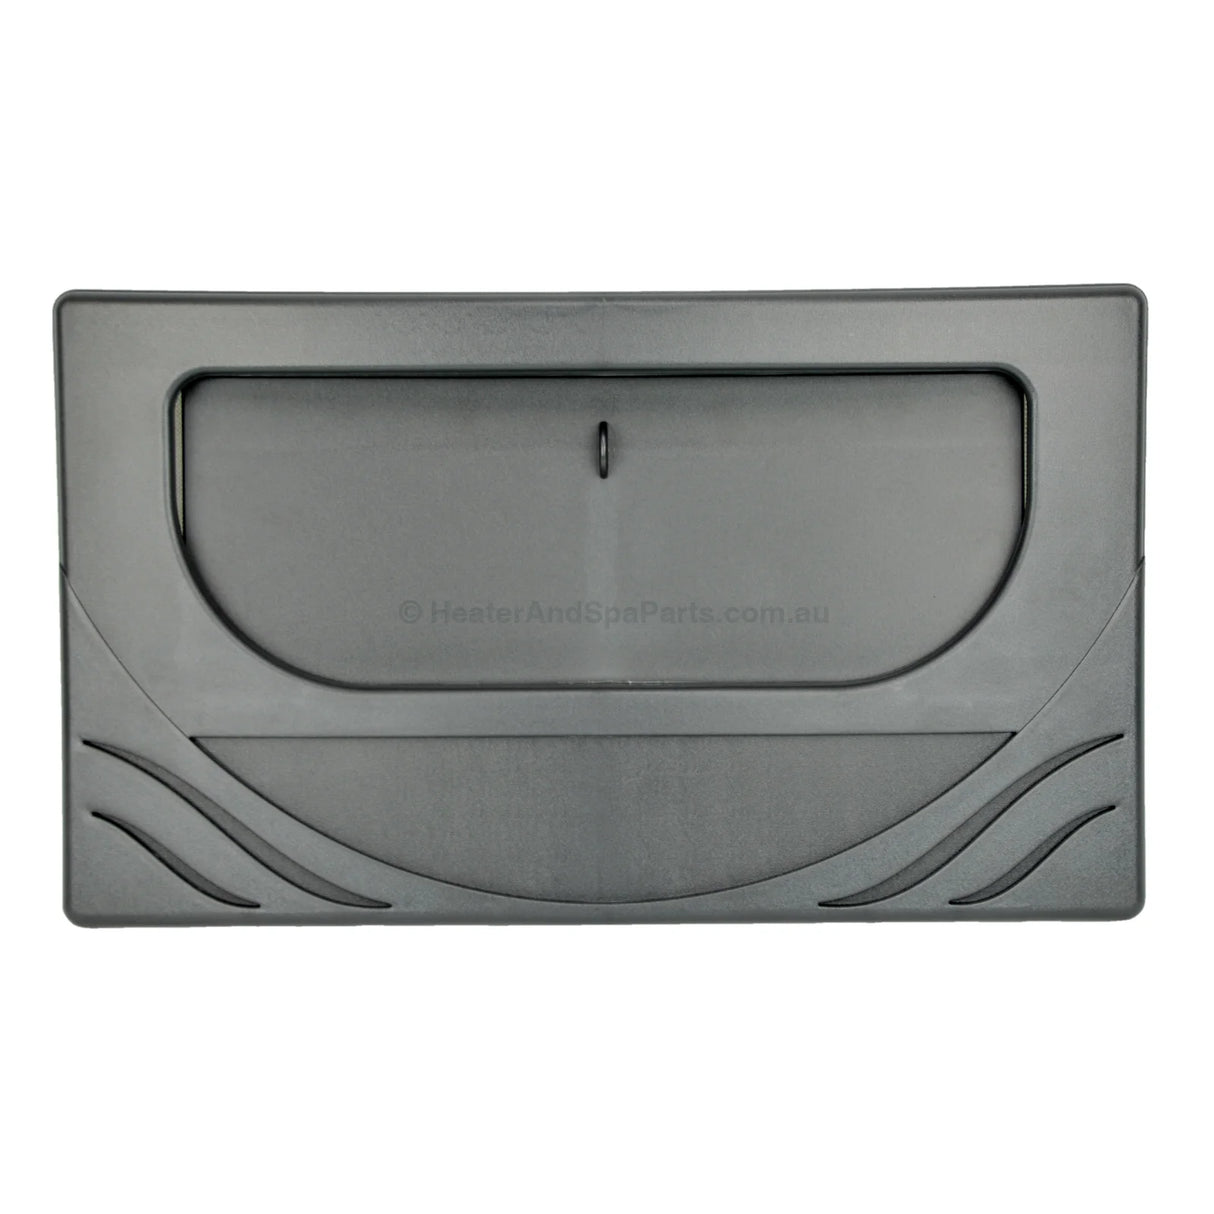 CMP Front Access Wide Mouth Weir Door & Frame - Wave - Graphite Grey - Heater and Spa Parts